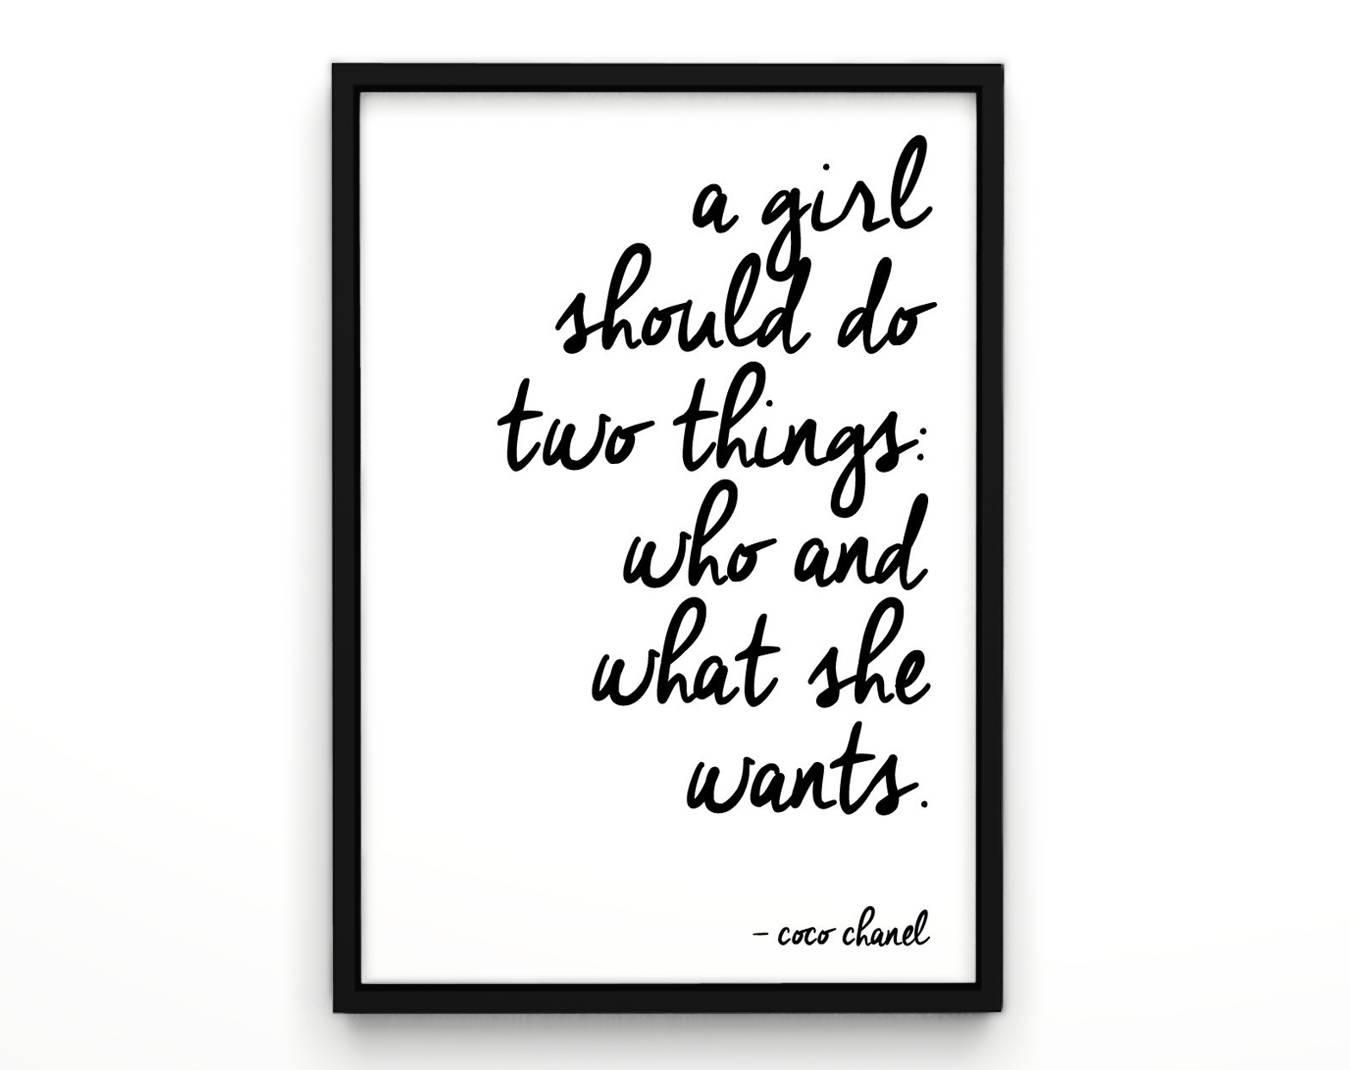 Chanel Wall Decor Coco Chanel Quotes Chanel Poster Wall In Chanel Wall Decor (View 14 of 20)